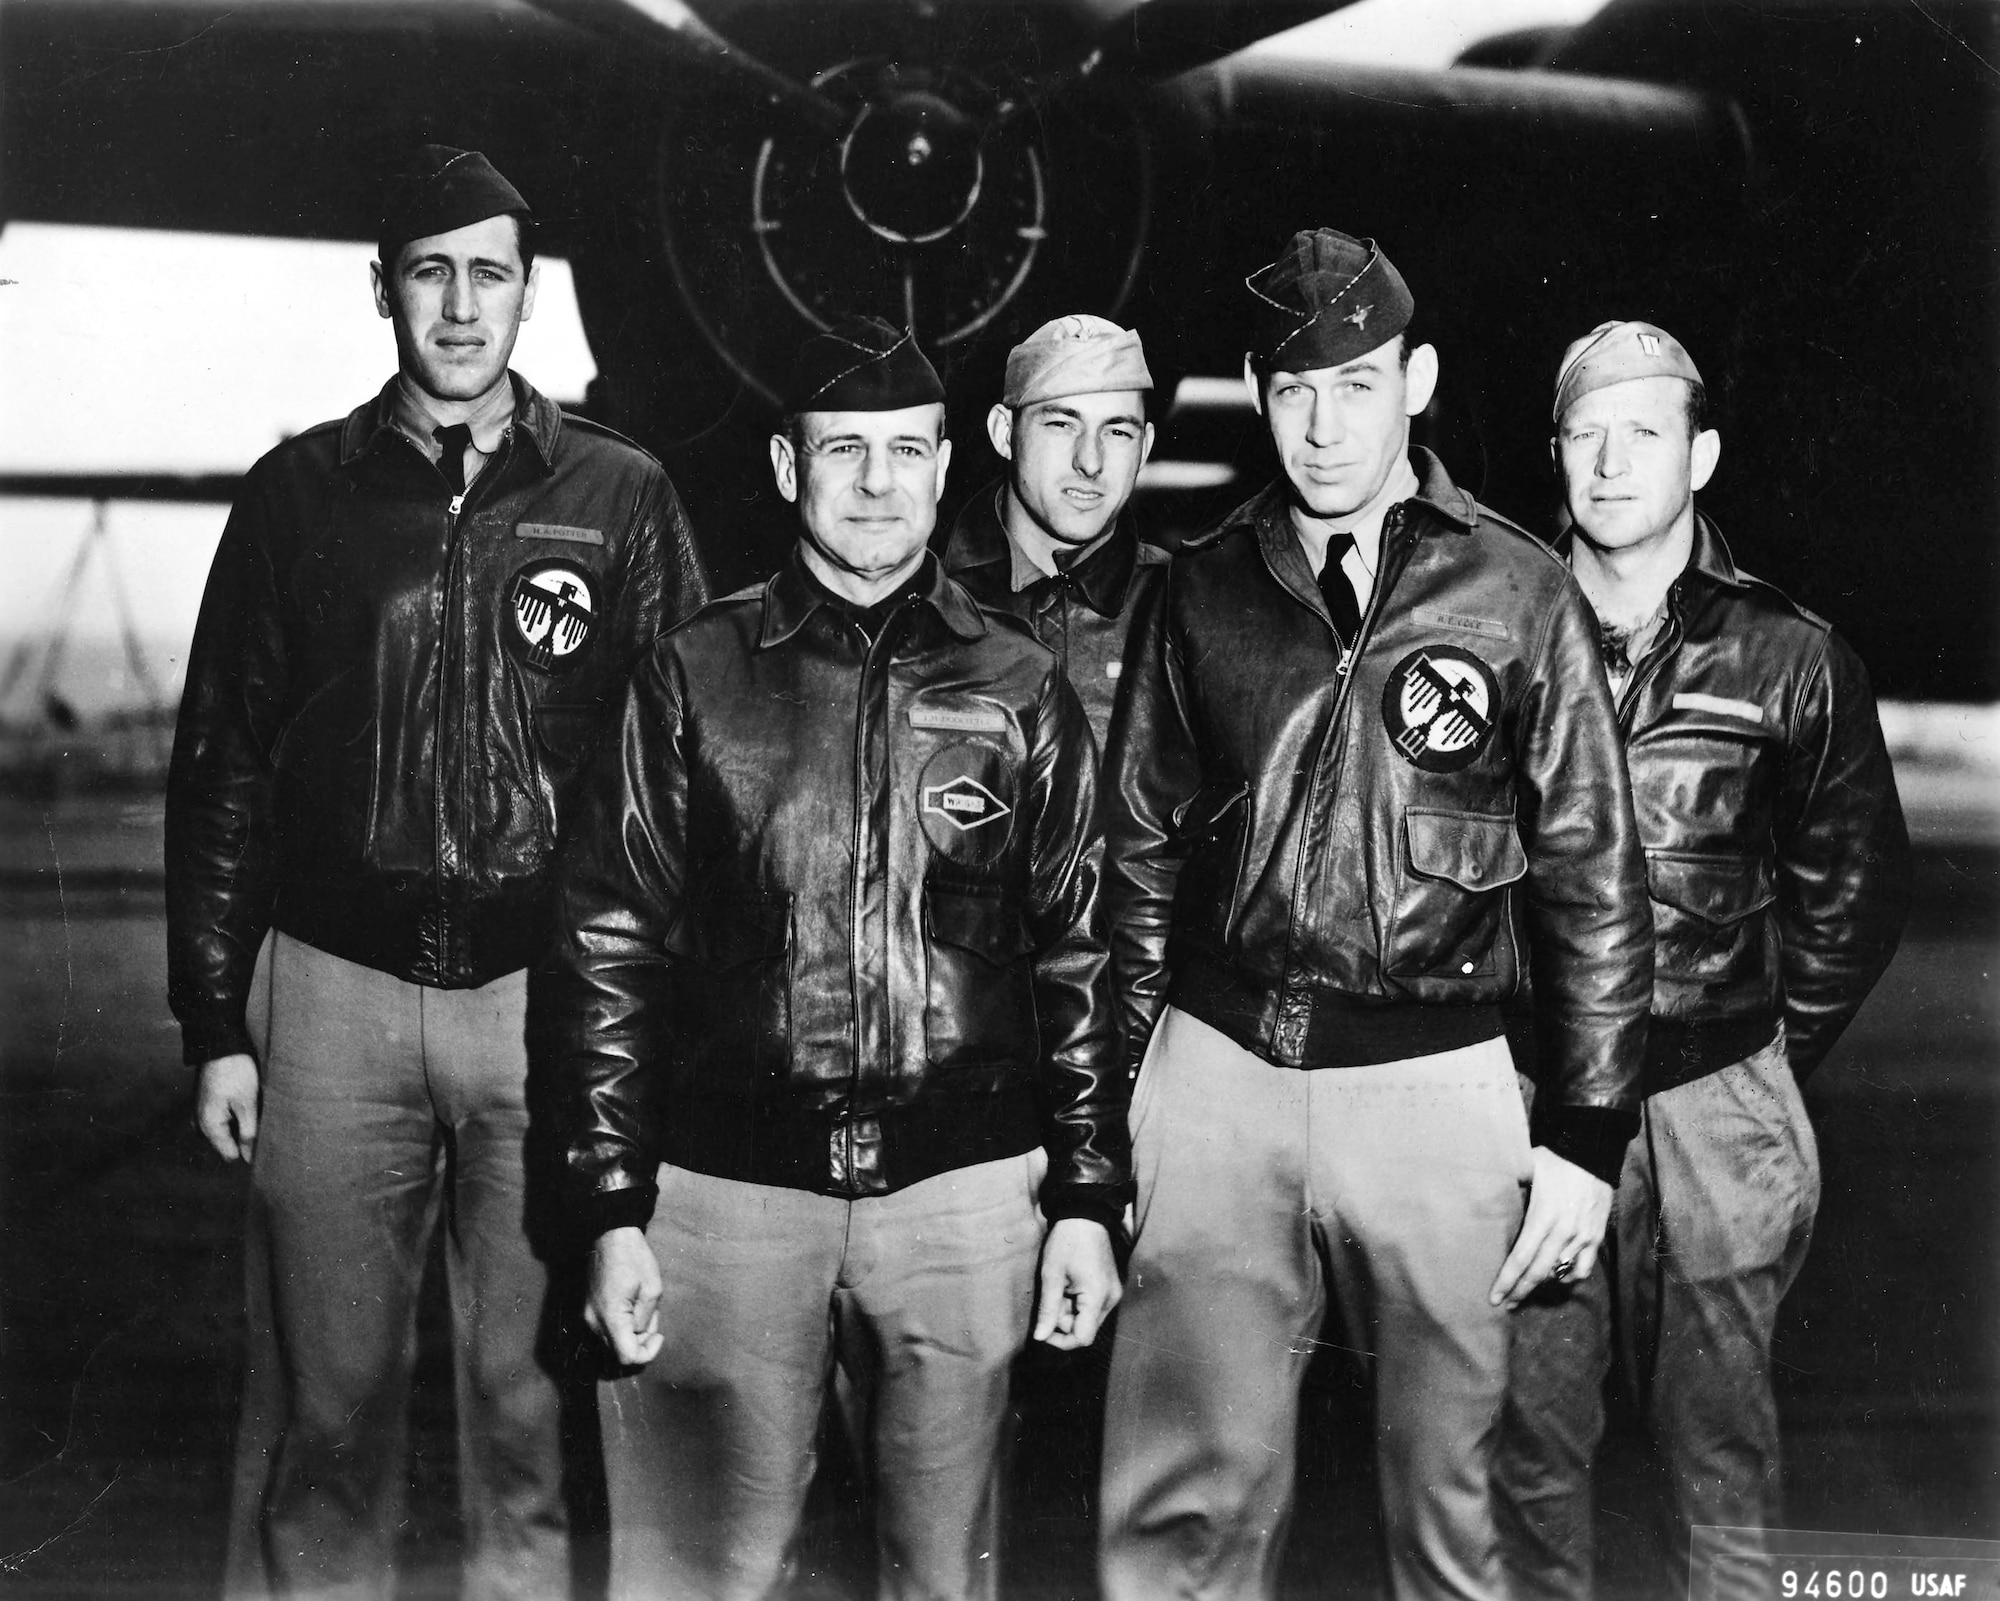 Crew 1, the Doolittle Crew, in a crew picture taken aboard USS Hornet (CV-8) enroute to Japan in April, 1942.  Left to right are Lt. Henry A. Potter, Navigator; Lt Col. James H. Doolittle, Pilot; Lt. Fred A. Braemer, Bombardier; Lt. Richard E. Cole and Sgt. Paul J. Leonard, Flight Engineer/Gunner.  Richard Cole was the last surviving Raider, who passed away at the age of 103 on April 9, 2019.  (Children of the Doolittle Raiders.com)